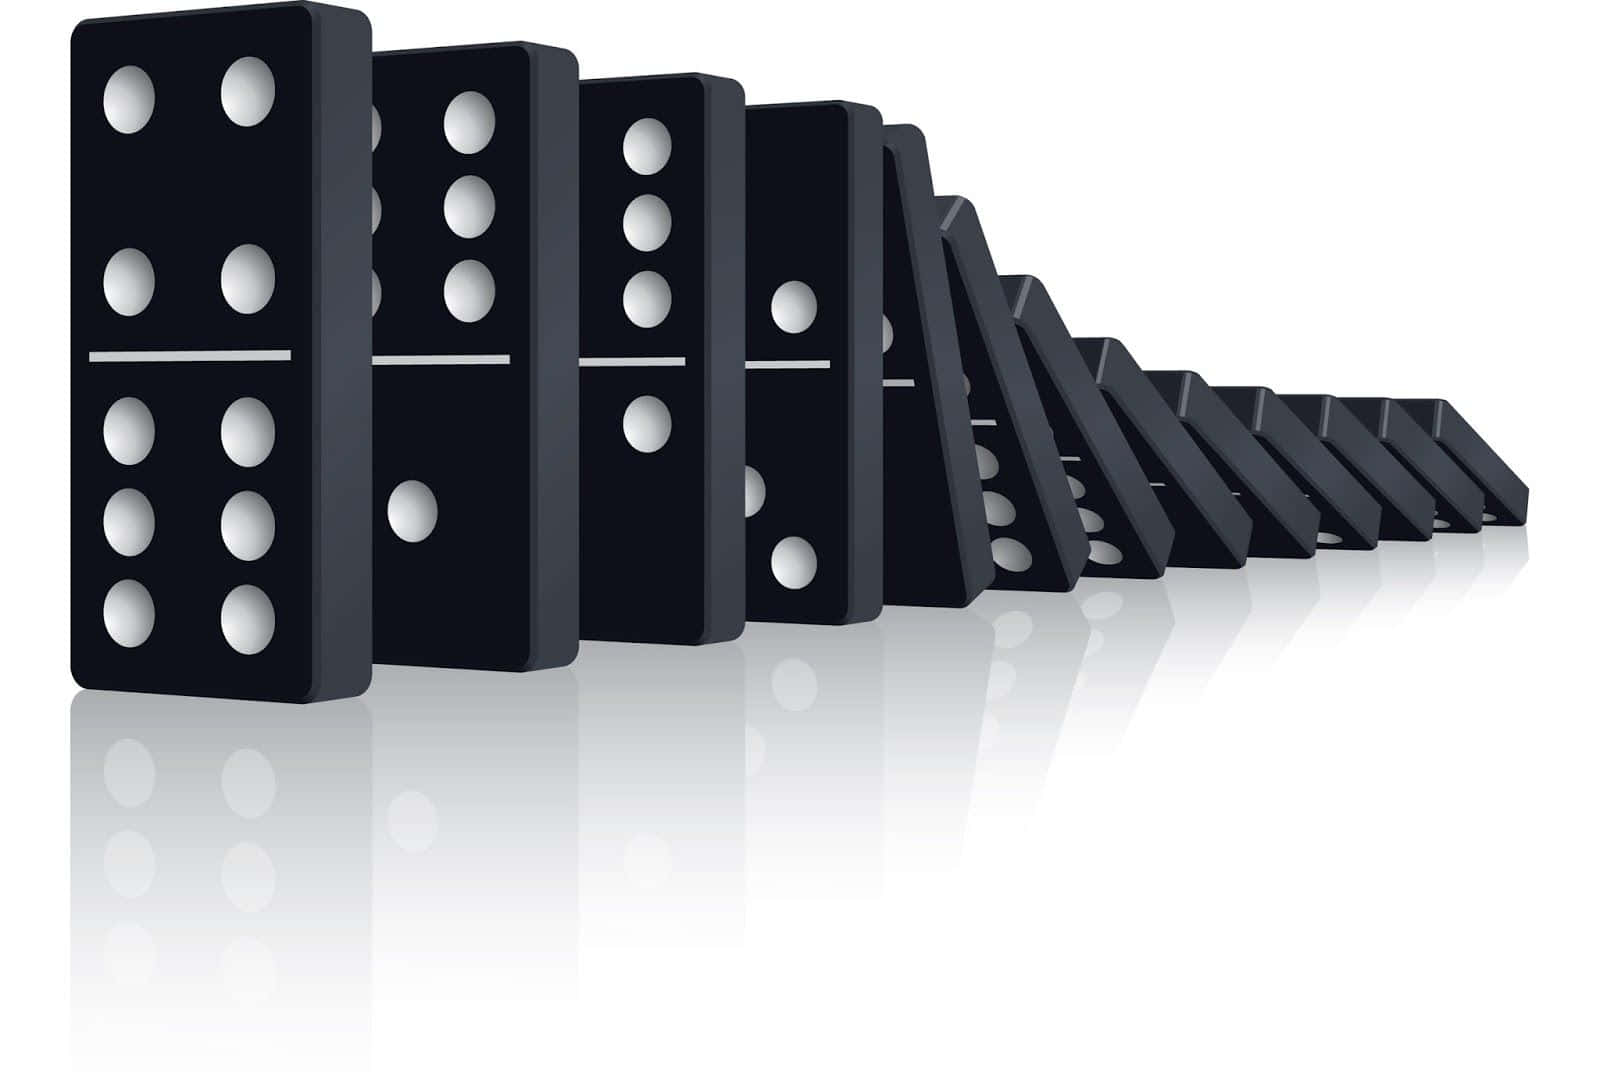 Domino pieces cascading in an epic chain reaction